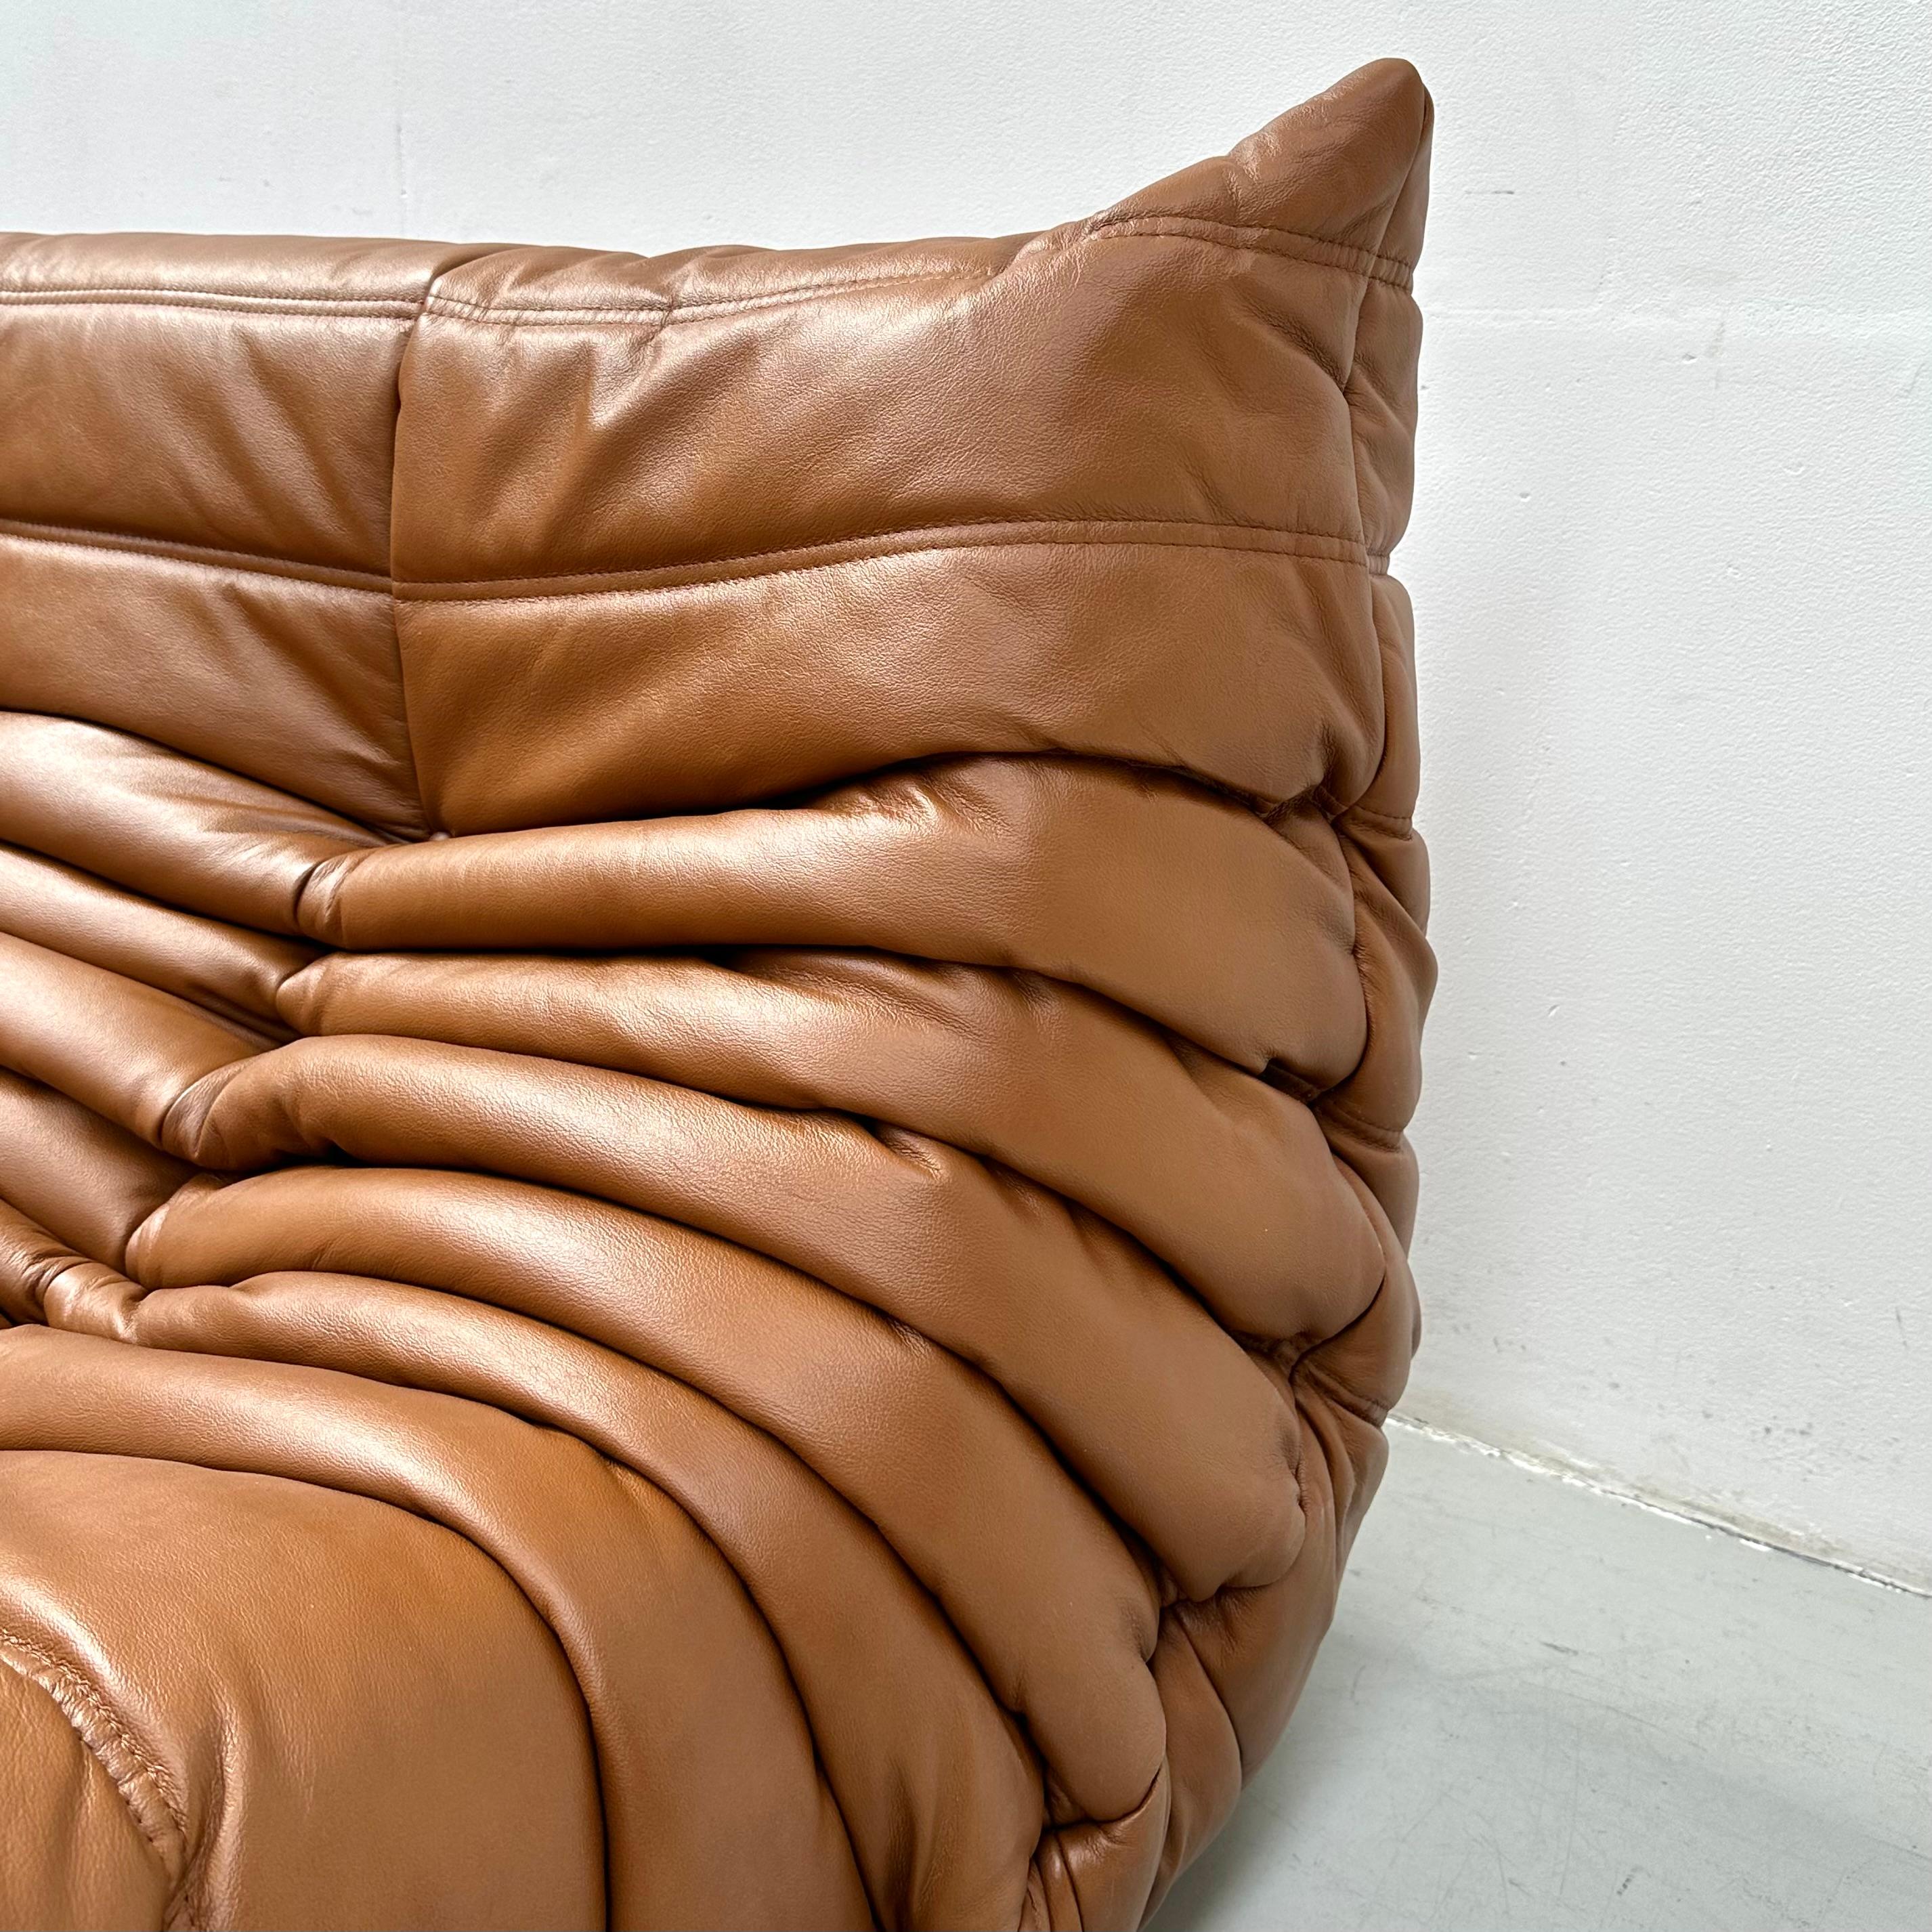 20th Century French Togo Sofa in Cognac Leather by Michel Ducaroy for Ligne Roset. For Sale